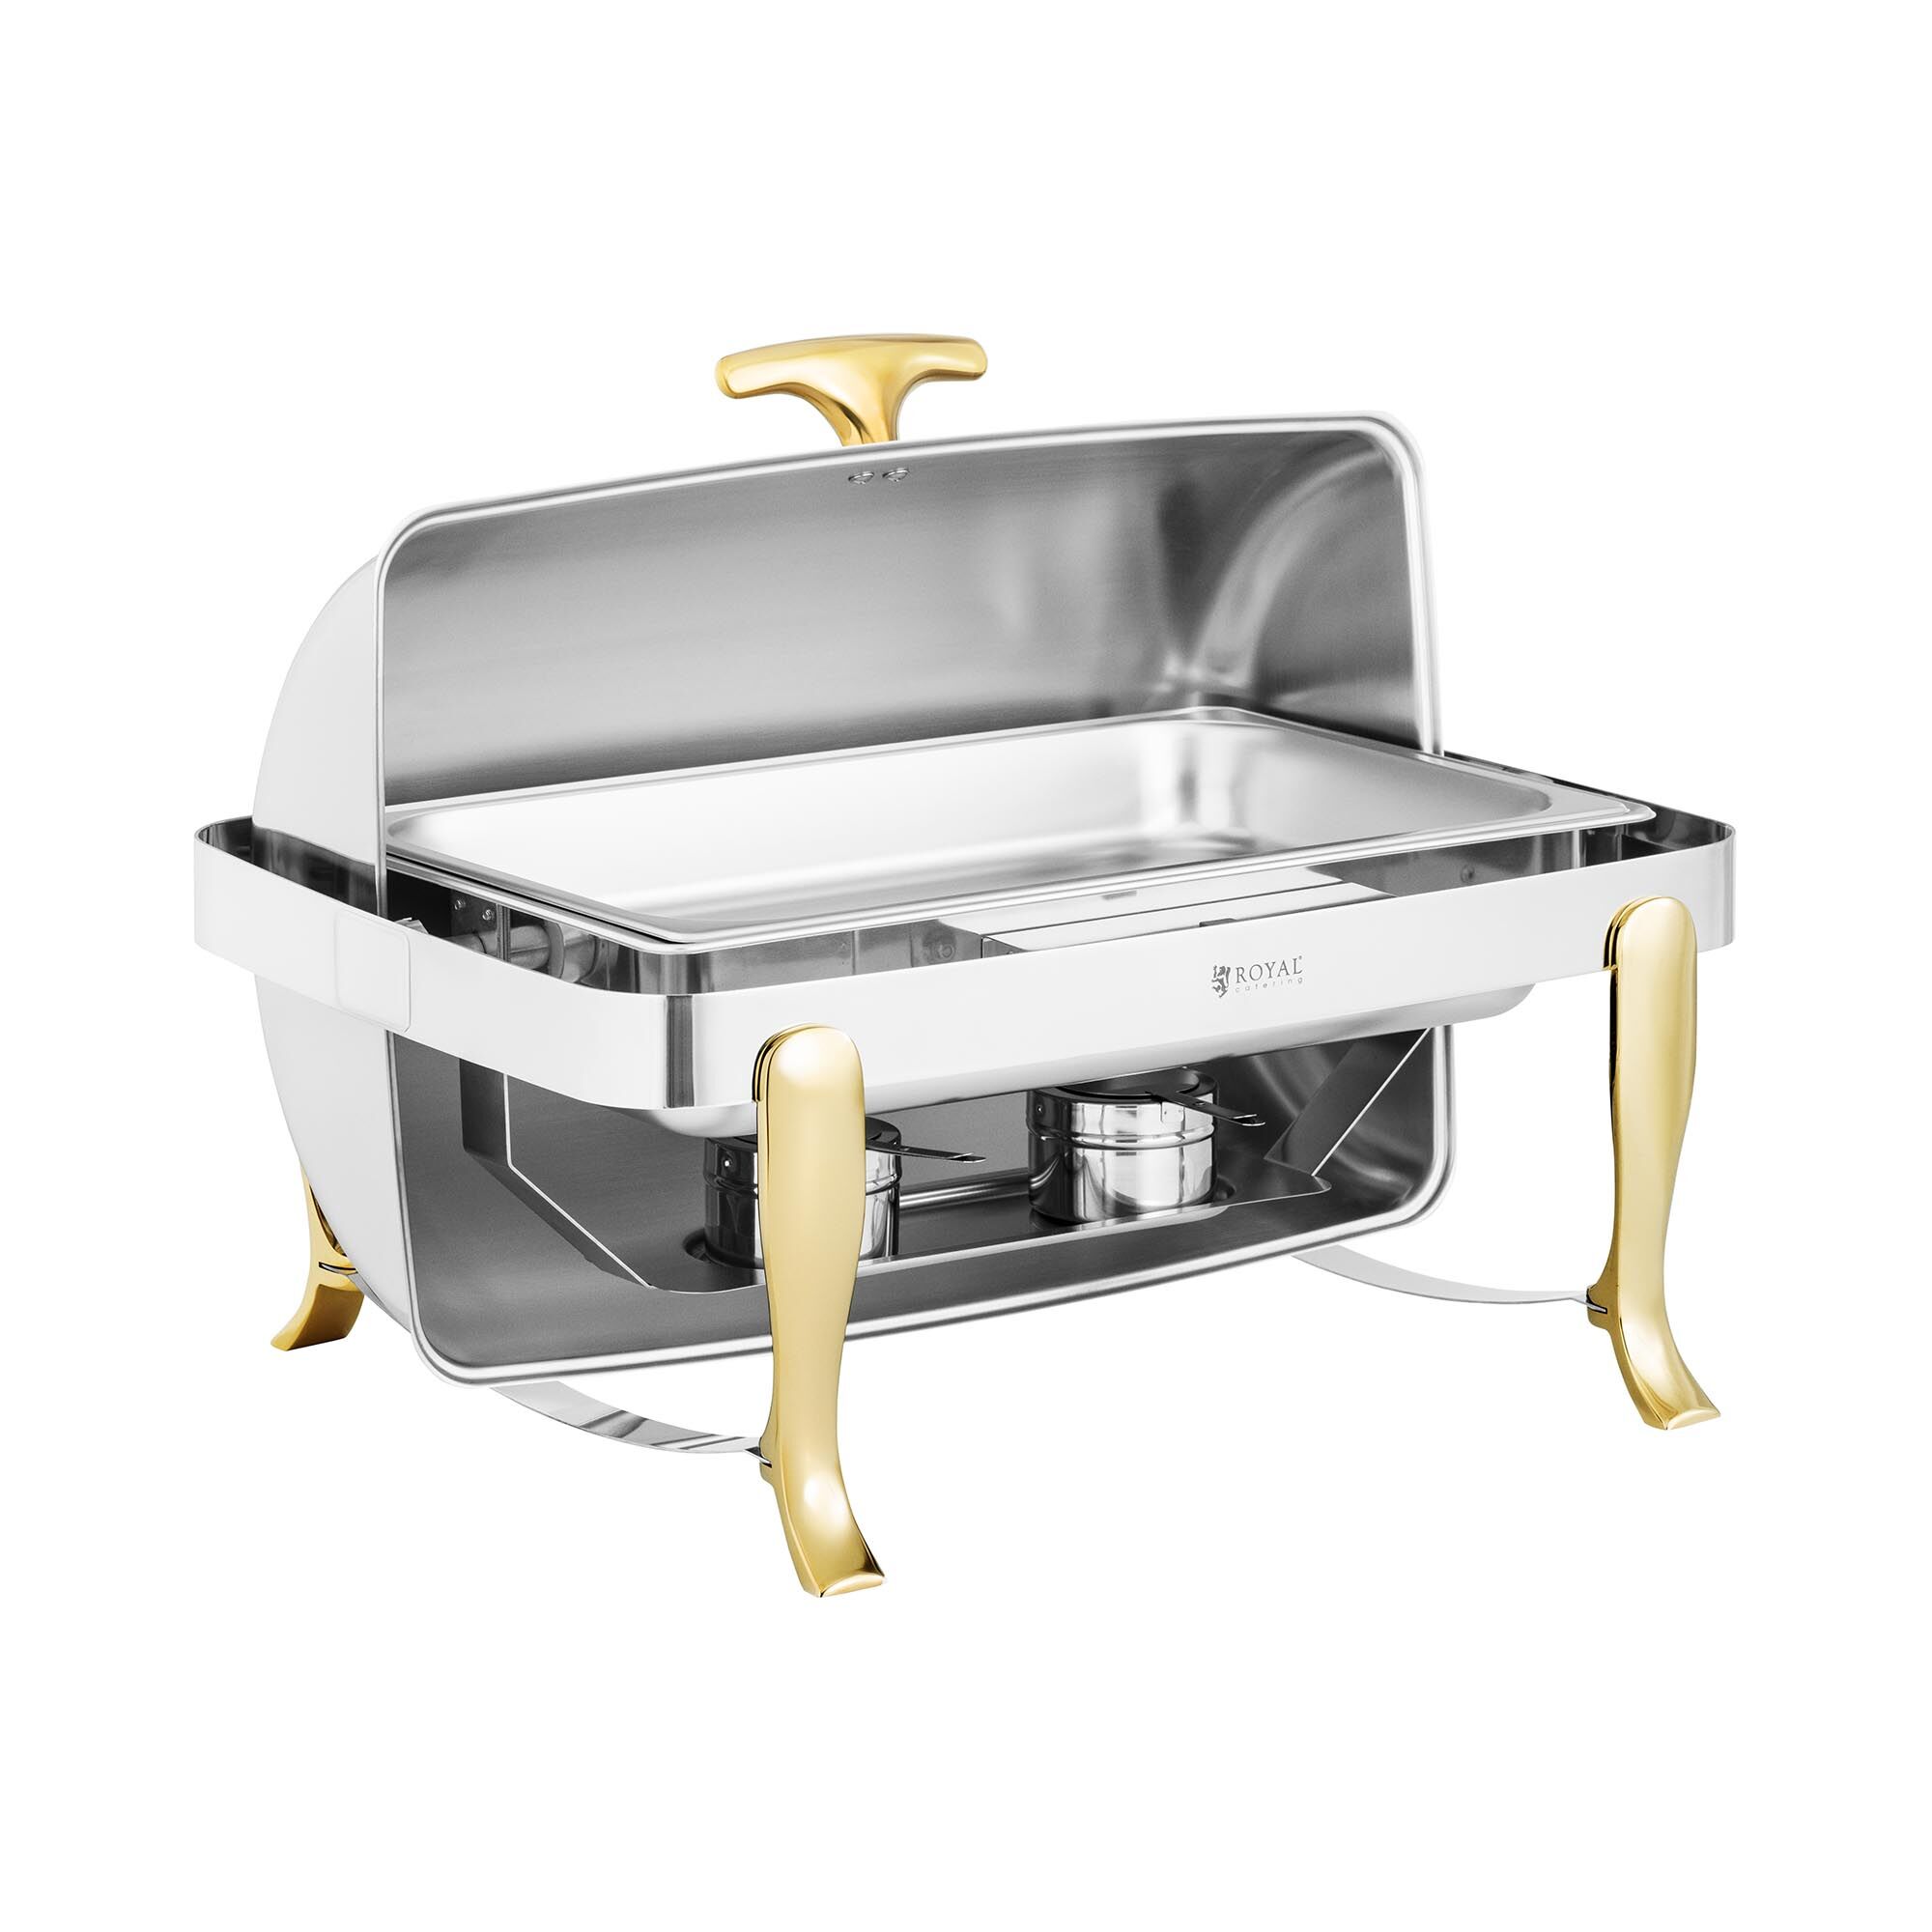 Royal Catering Chafing Dish - GN 1/1 - gullaksenter - rolltop-hette - 9 L - 2 brenselbeholder - Royal Catering RCCD-RT22_9L